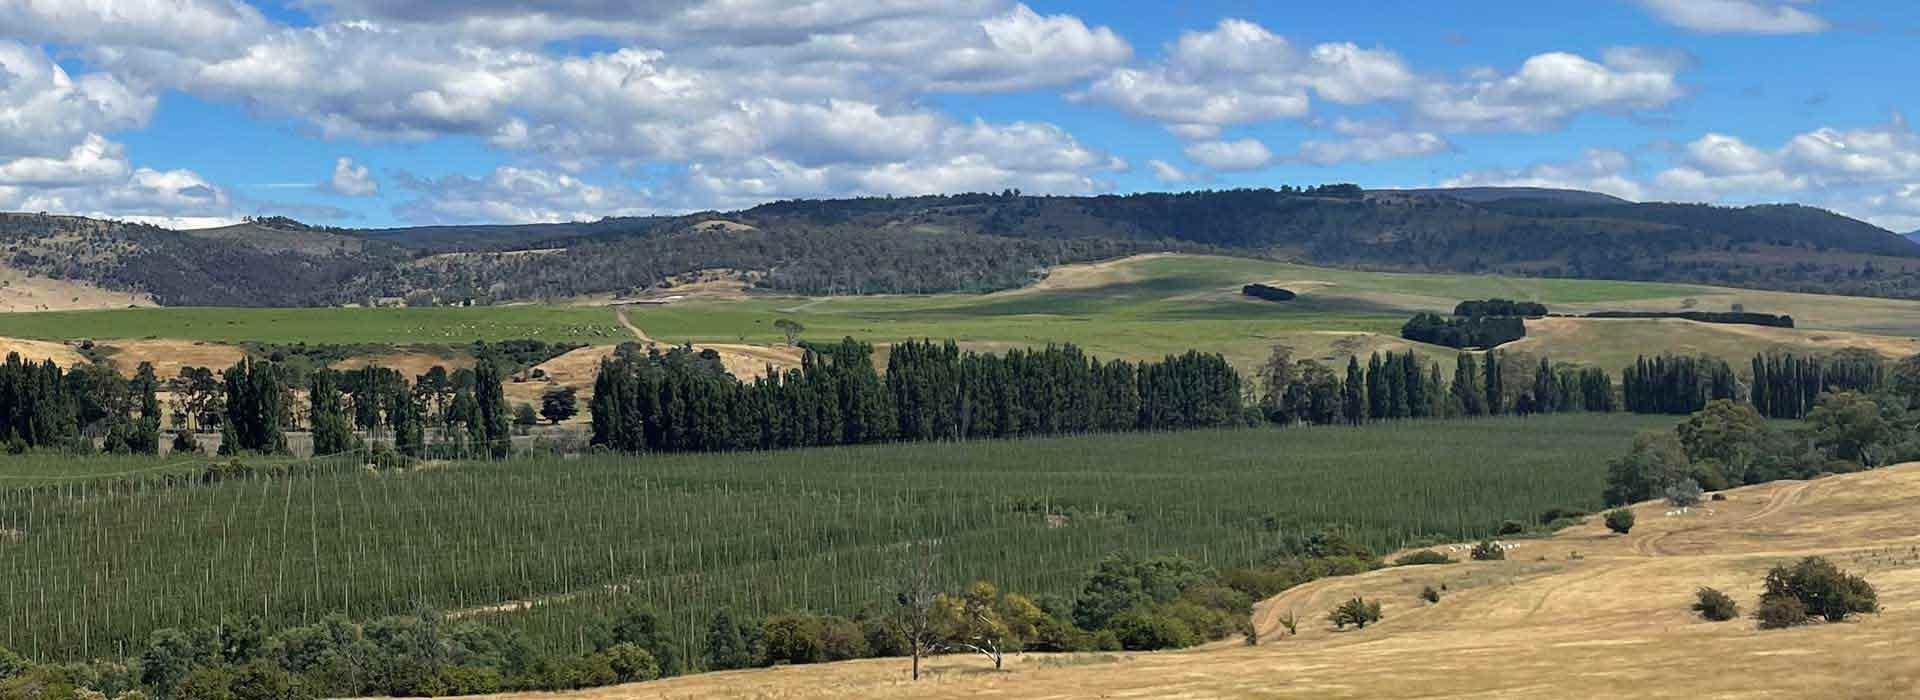 Landscape view of tree-covered hills, green fields and rows of hops bushes on a hops farm 